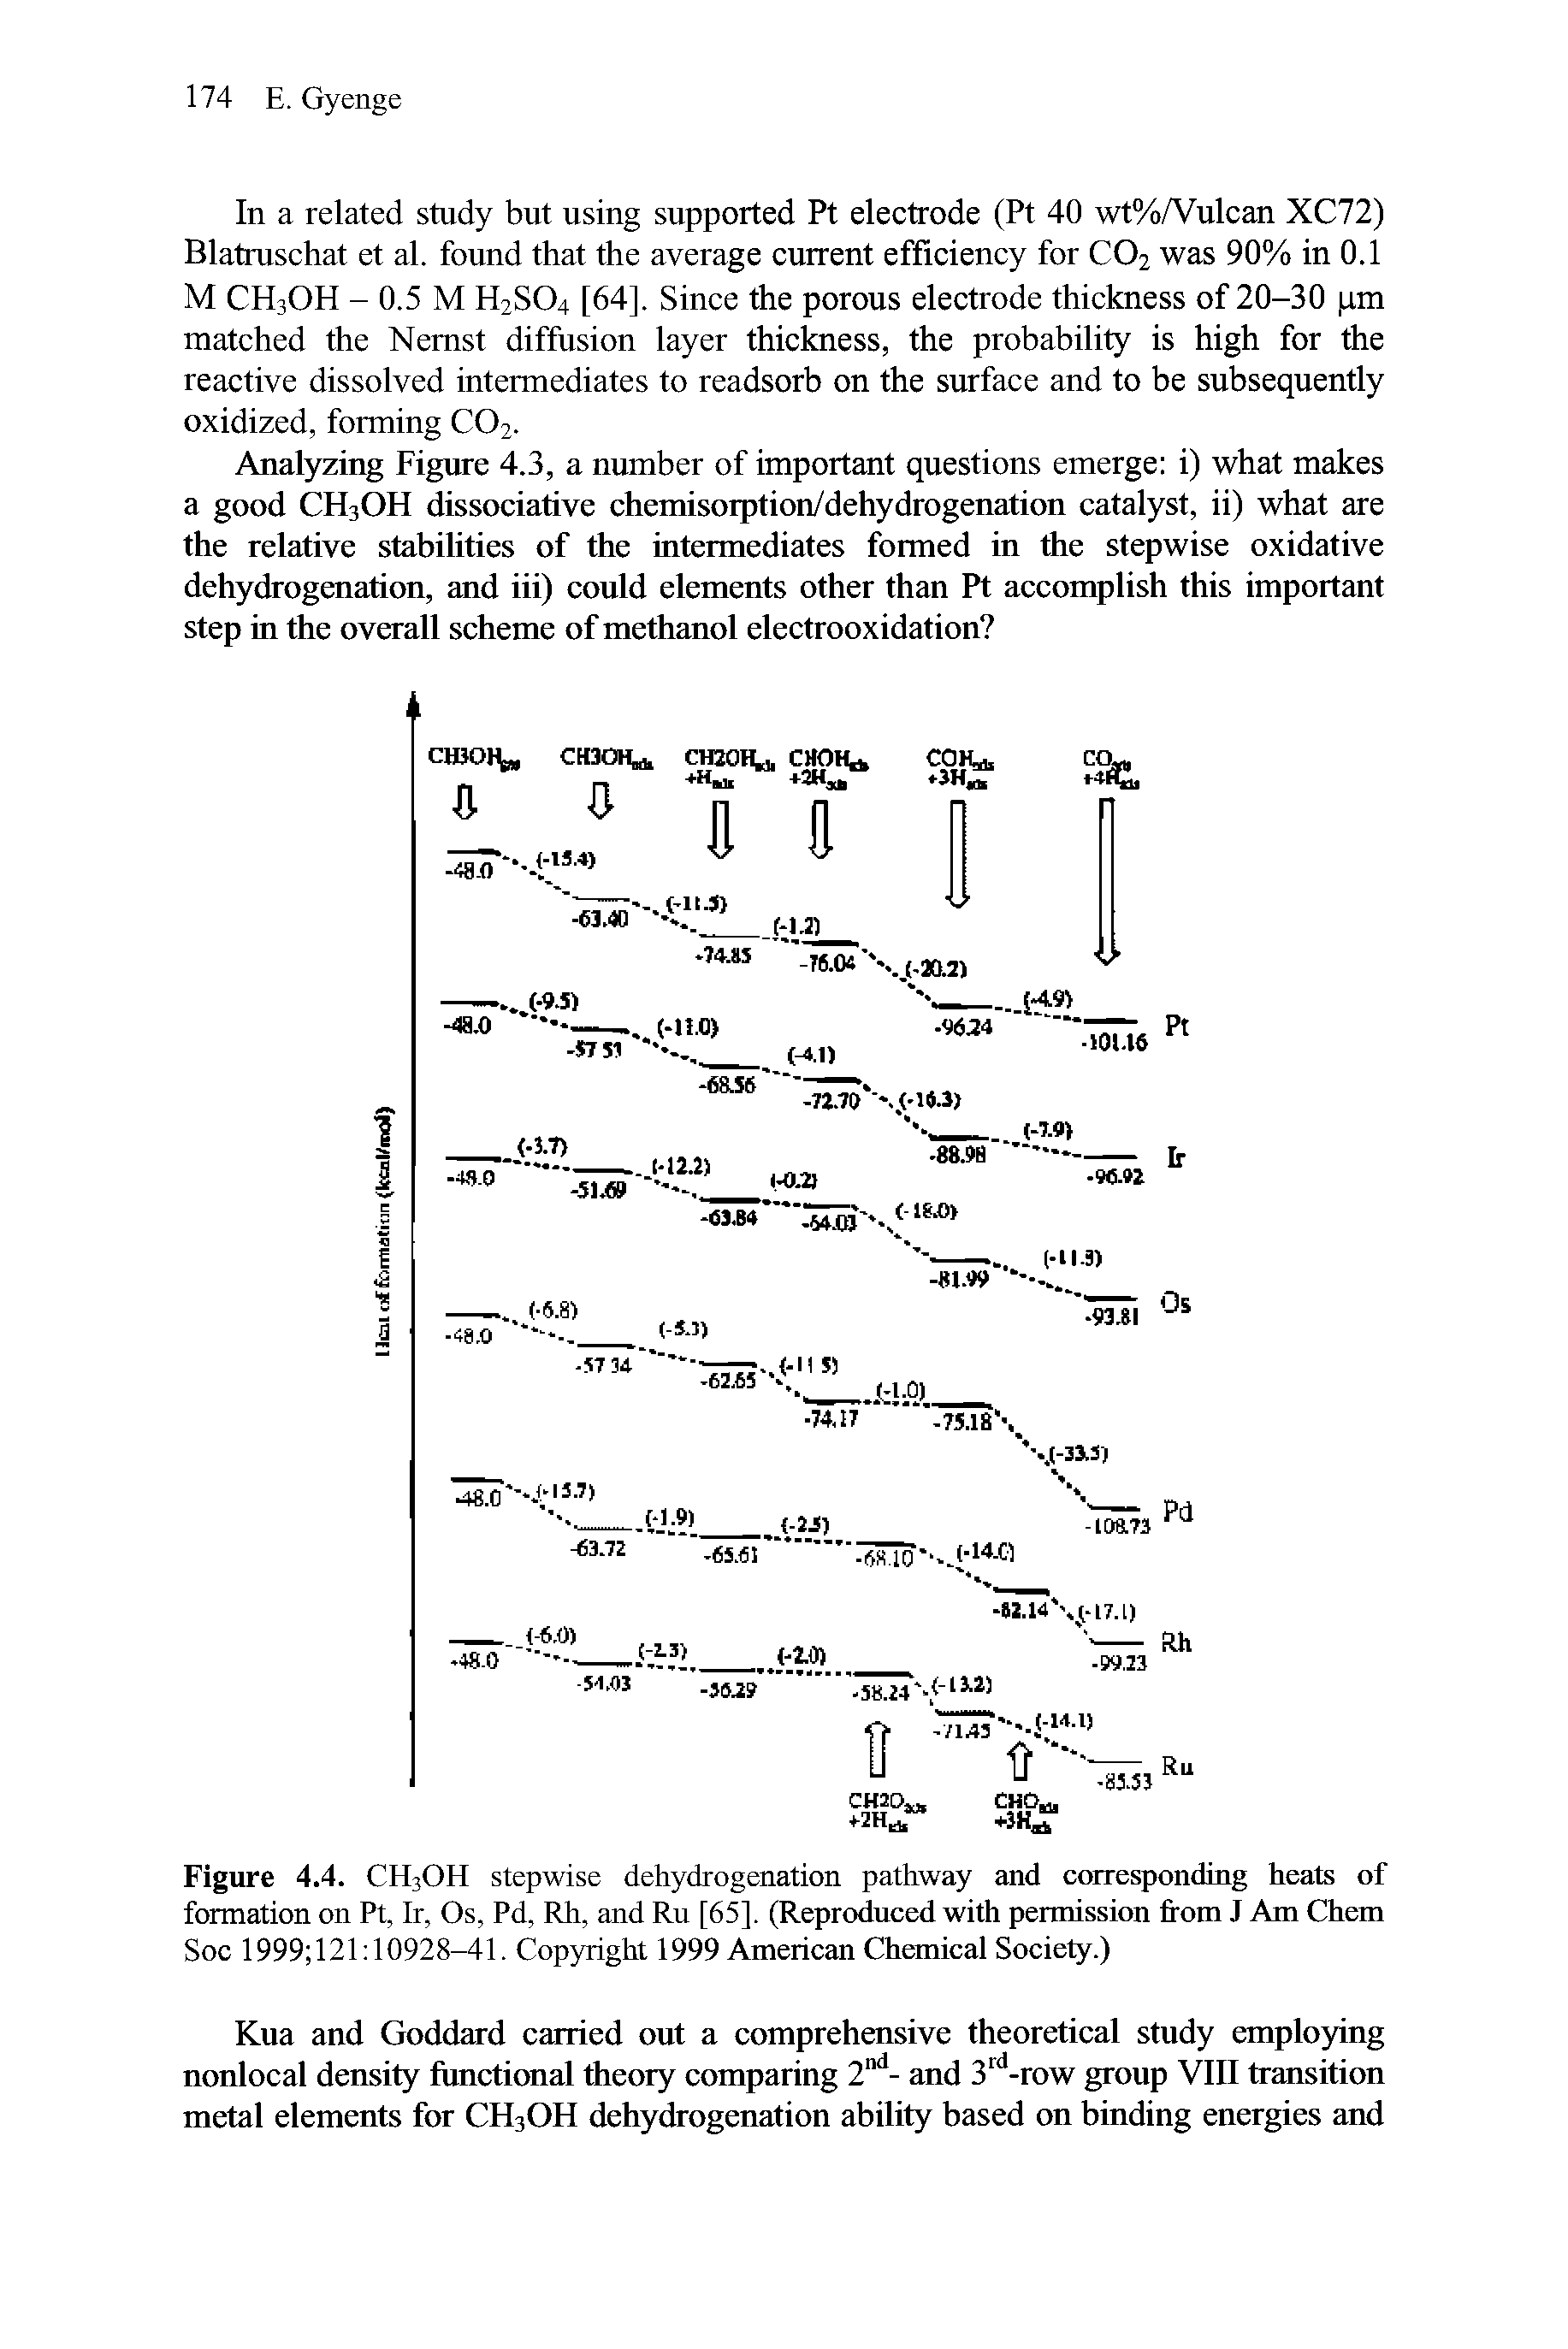 Figure 4.4. CH3OH stepwise dehydrogenation pathway and corresponding heats of formation on Pt, Ir, Os, Pd, Rh, and Ru [65]. (Reproduced with permission from J Am Chem Soc 1999 121 10928-41. Copyright 1999 American Chemical Society.)...